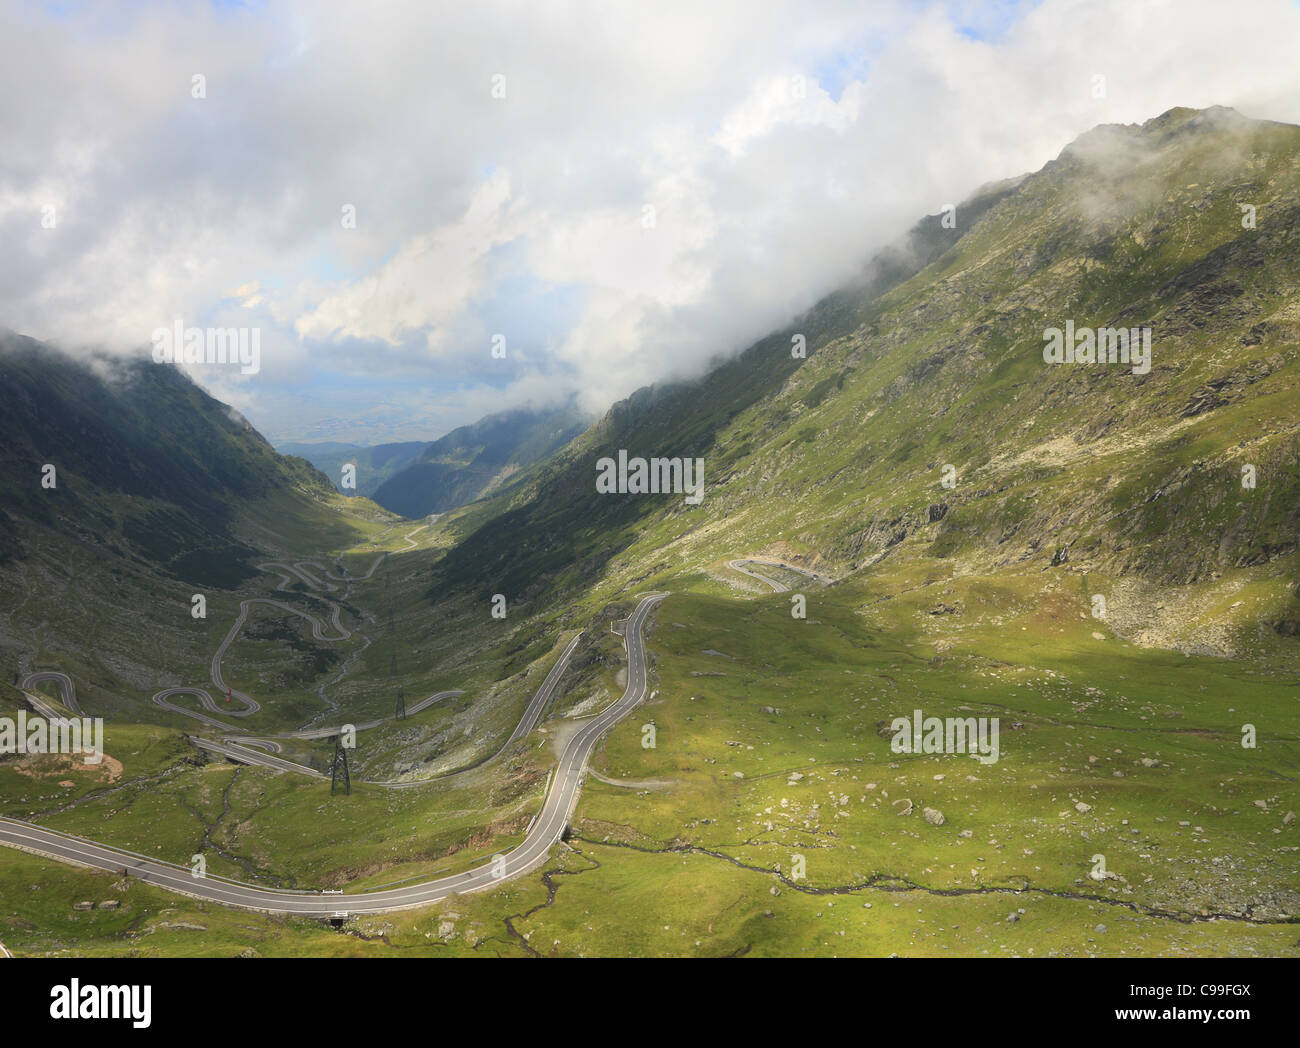 Fragment of a high altitude road in the mountains.Location:Transfagarasan road the highest road in Romania. Stock Photo